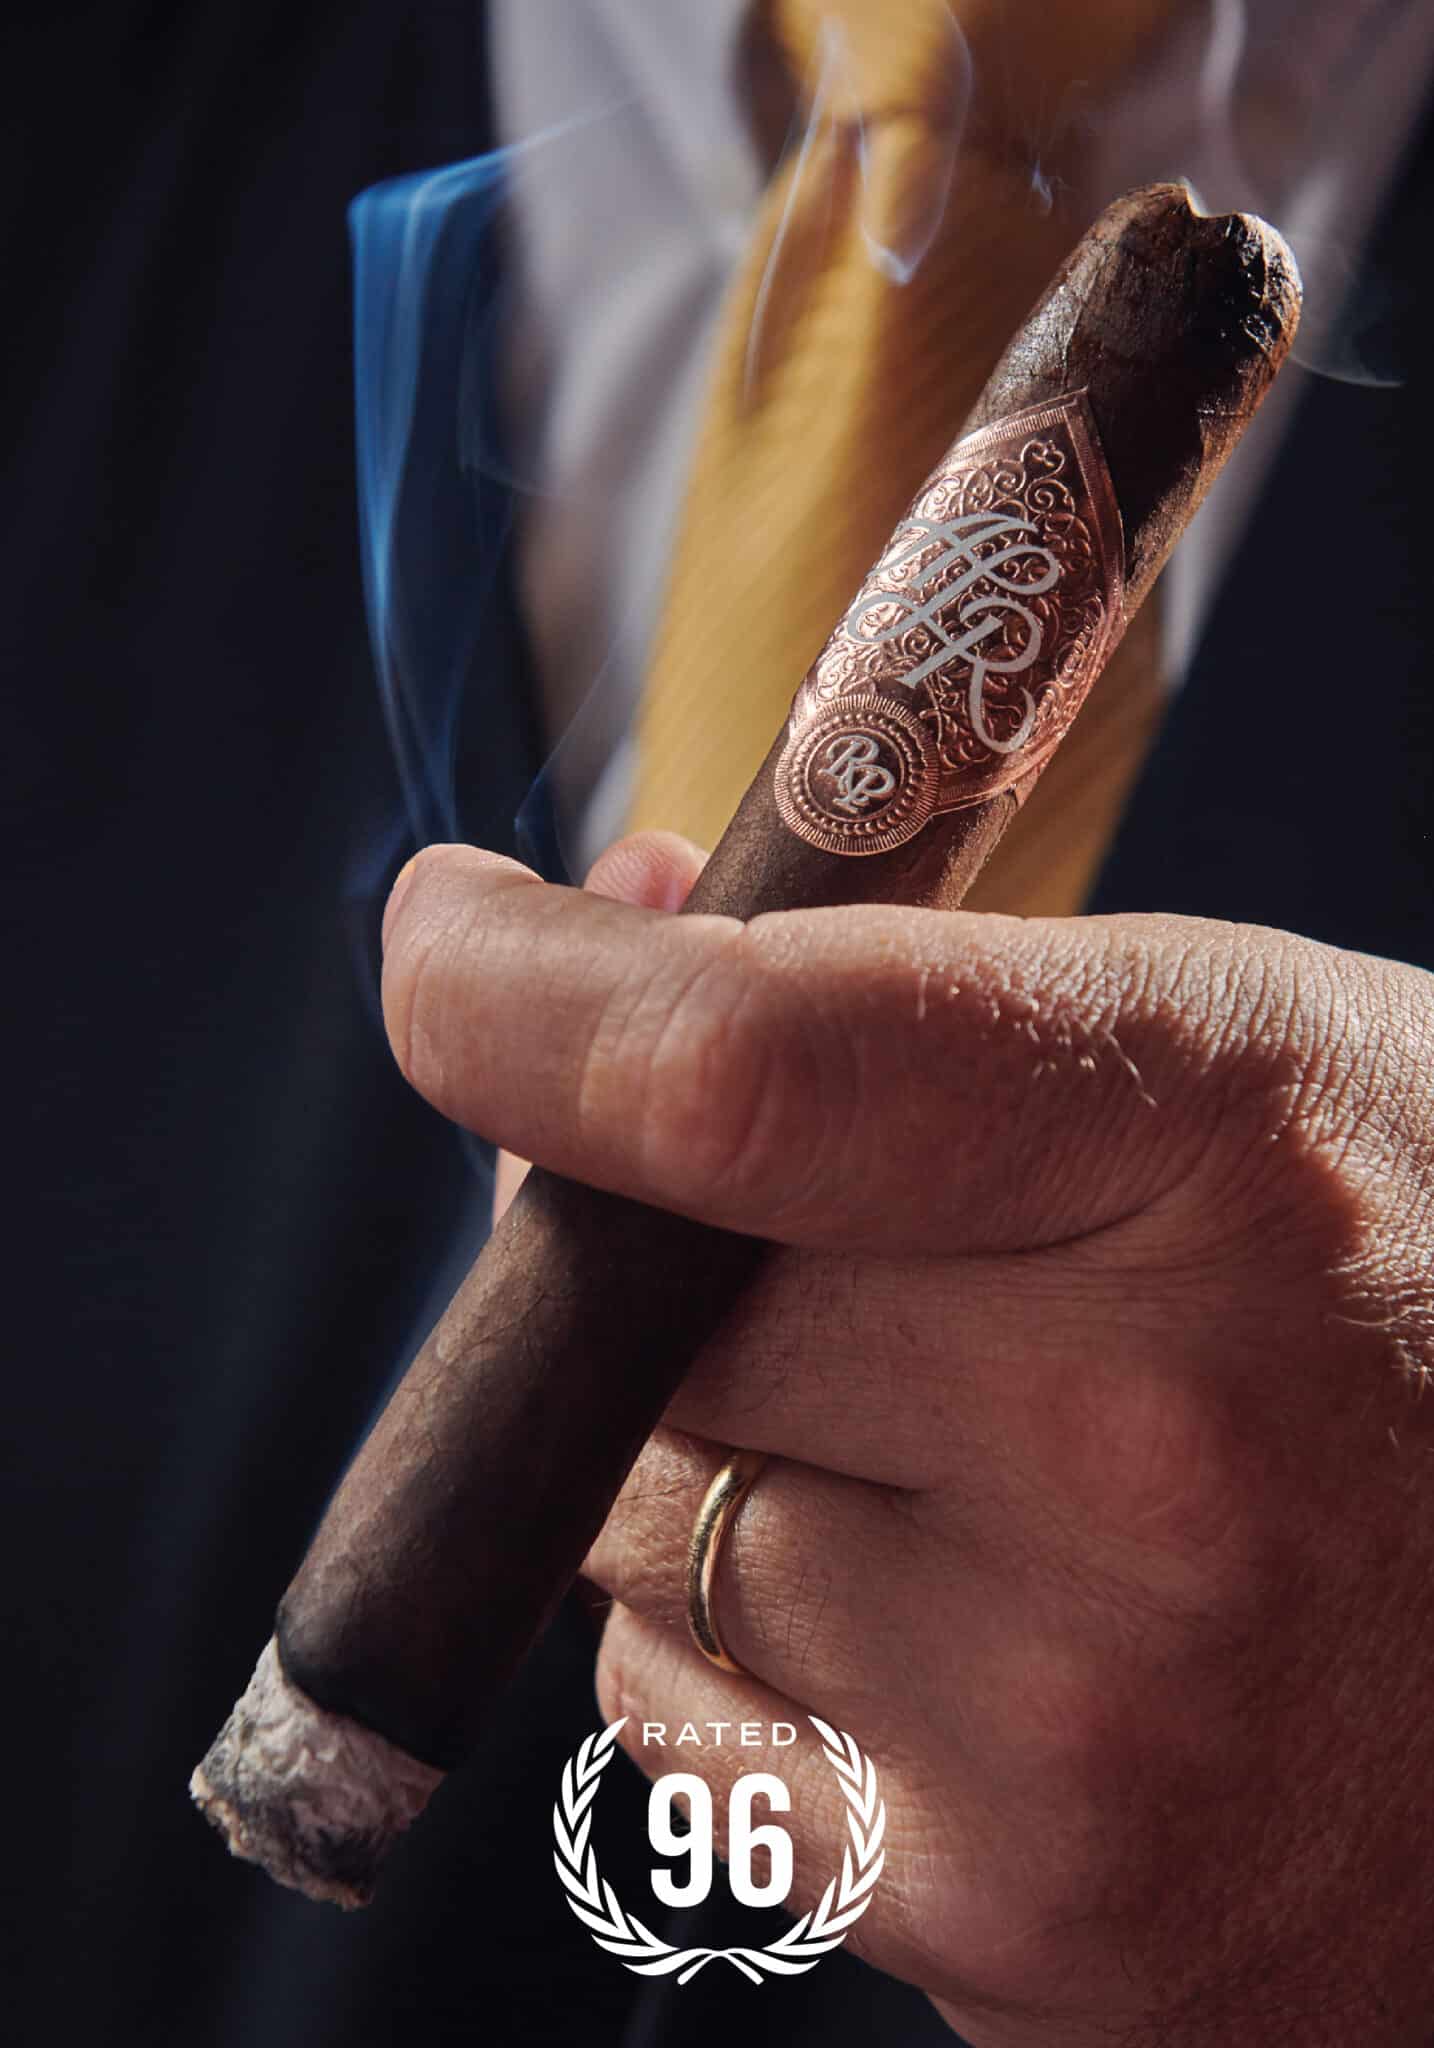 https://www.rockypatel.com/wp-content/uploads/2019/08/Top-Rated-Cigar-ALR-Second-Edition-by-Rocky-Patel-01-scaled.jpg